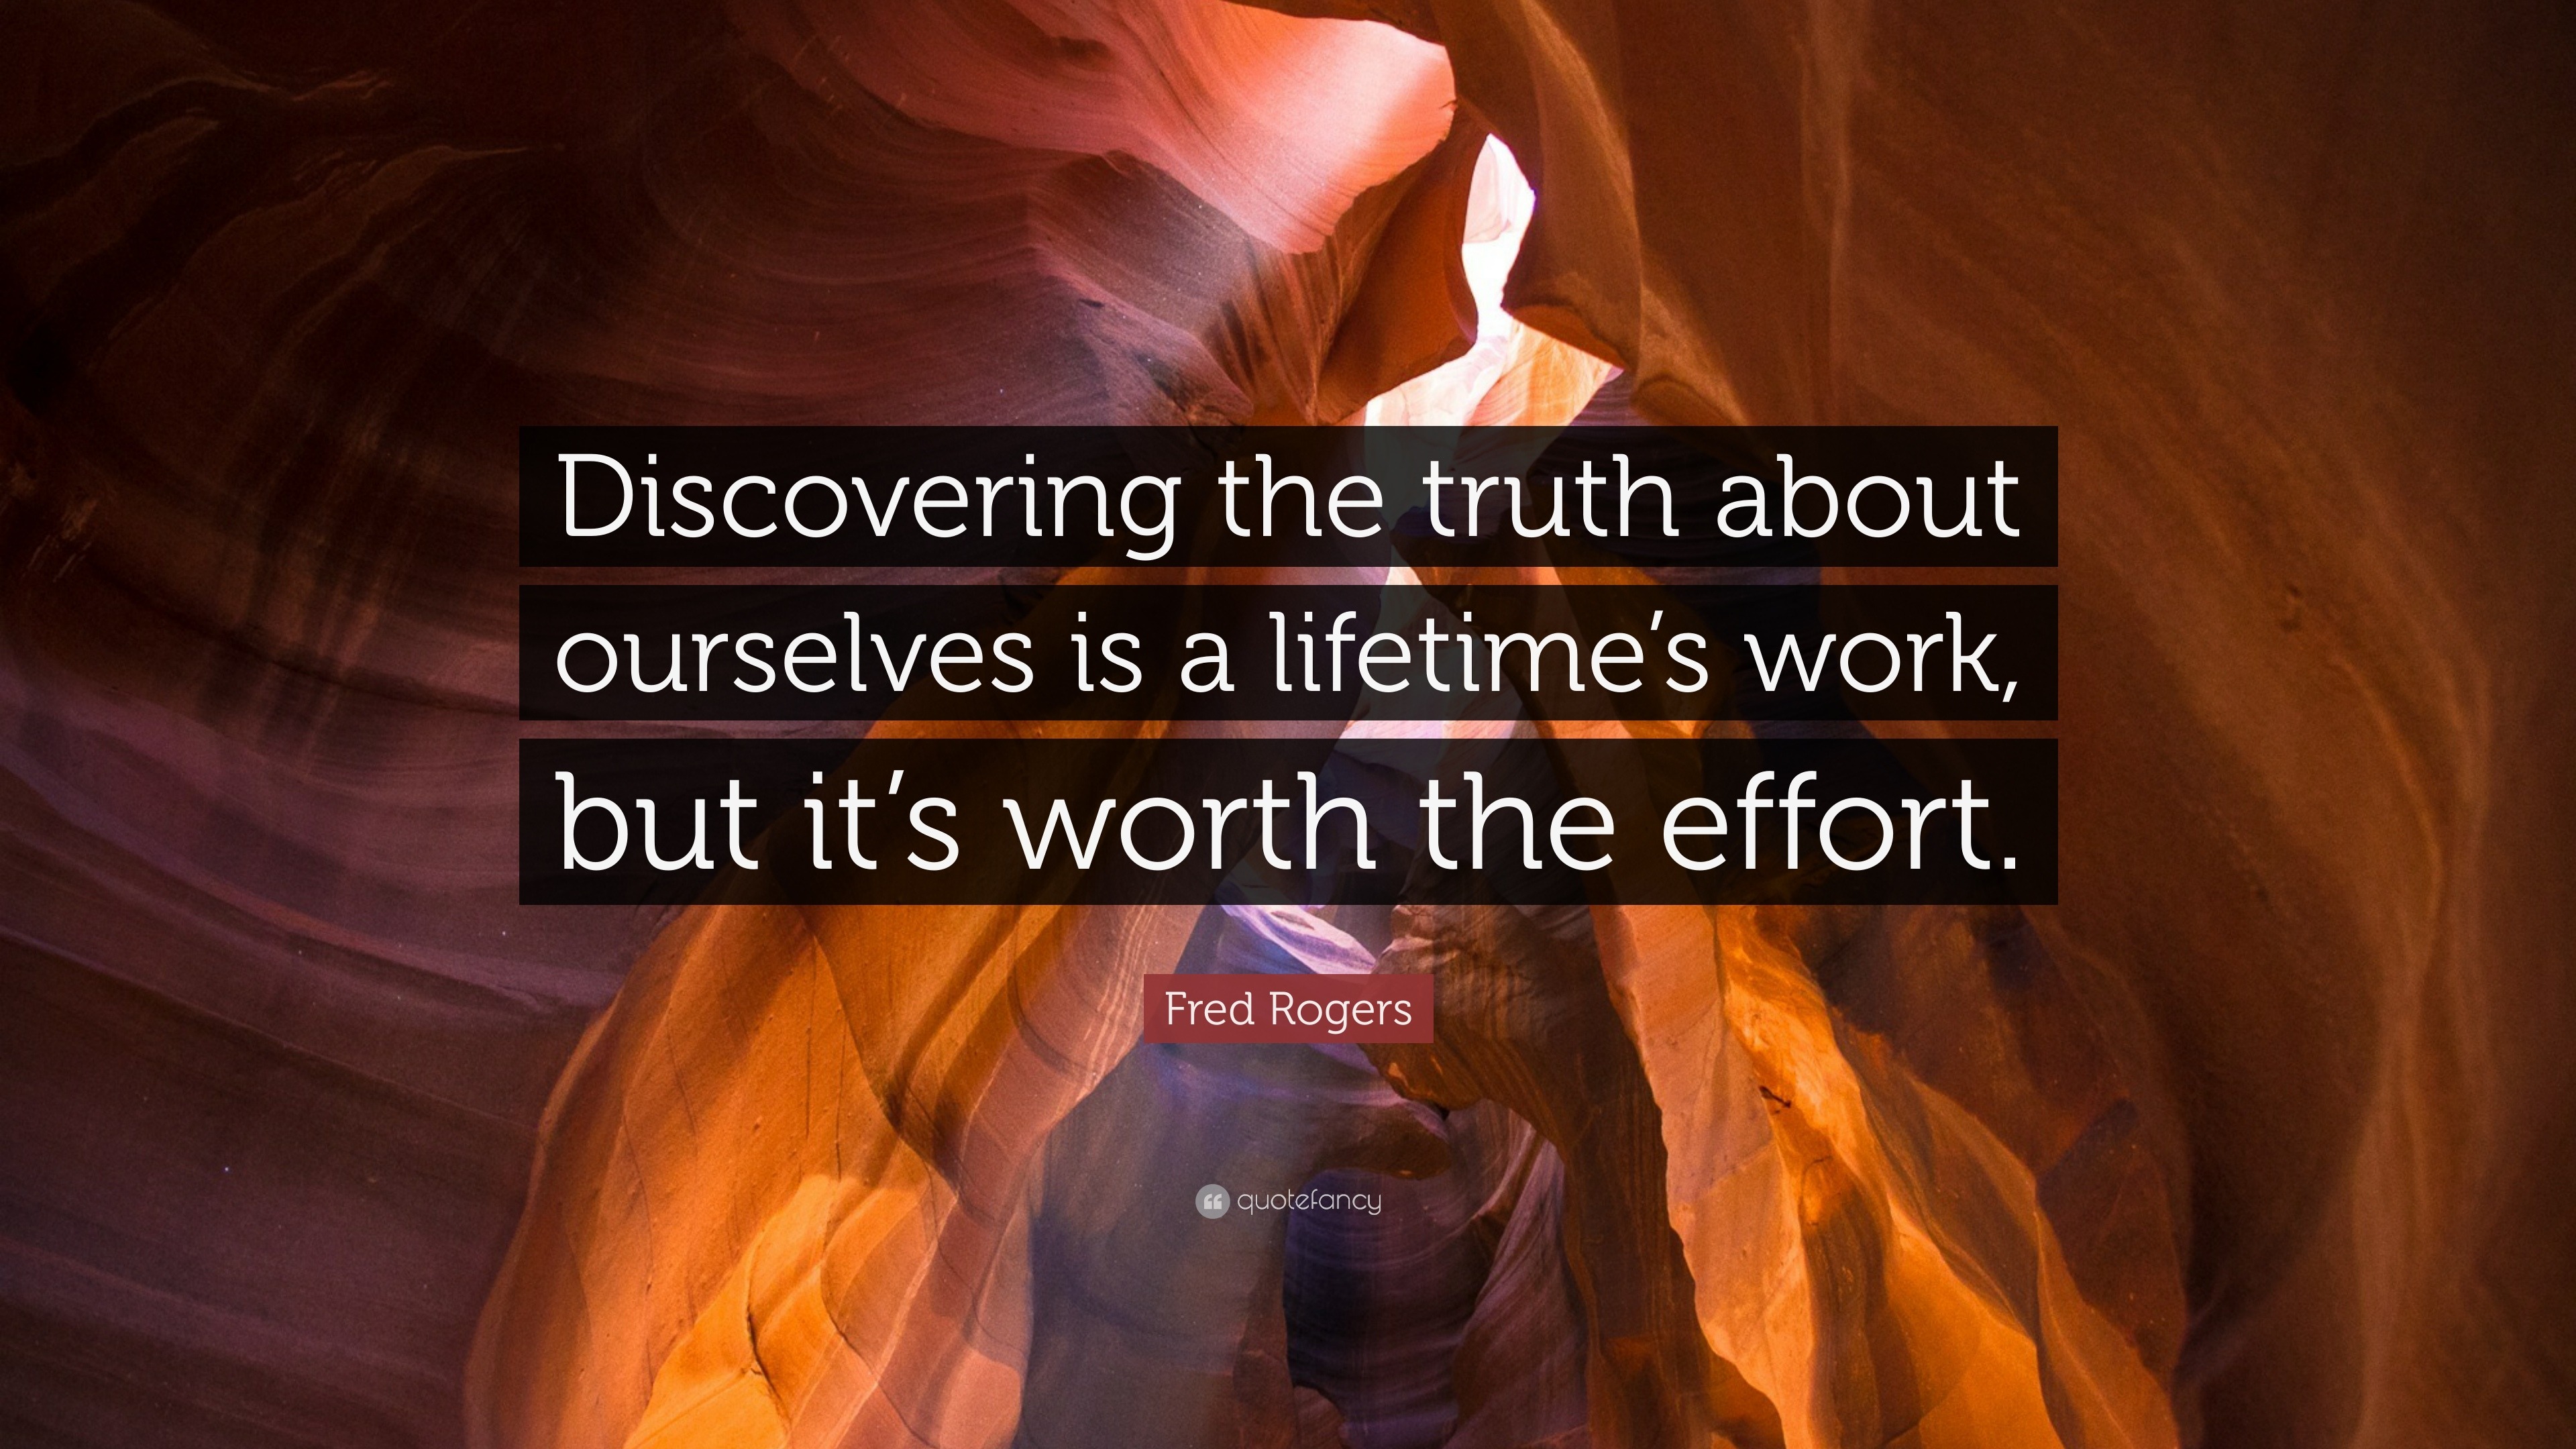 Fred Rogers Quote: "Discovering the truth about ourselves ...